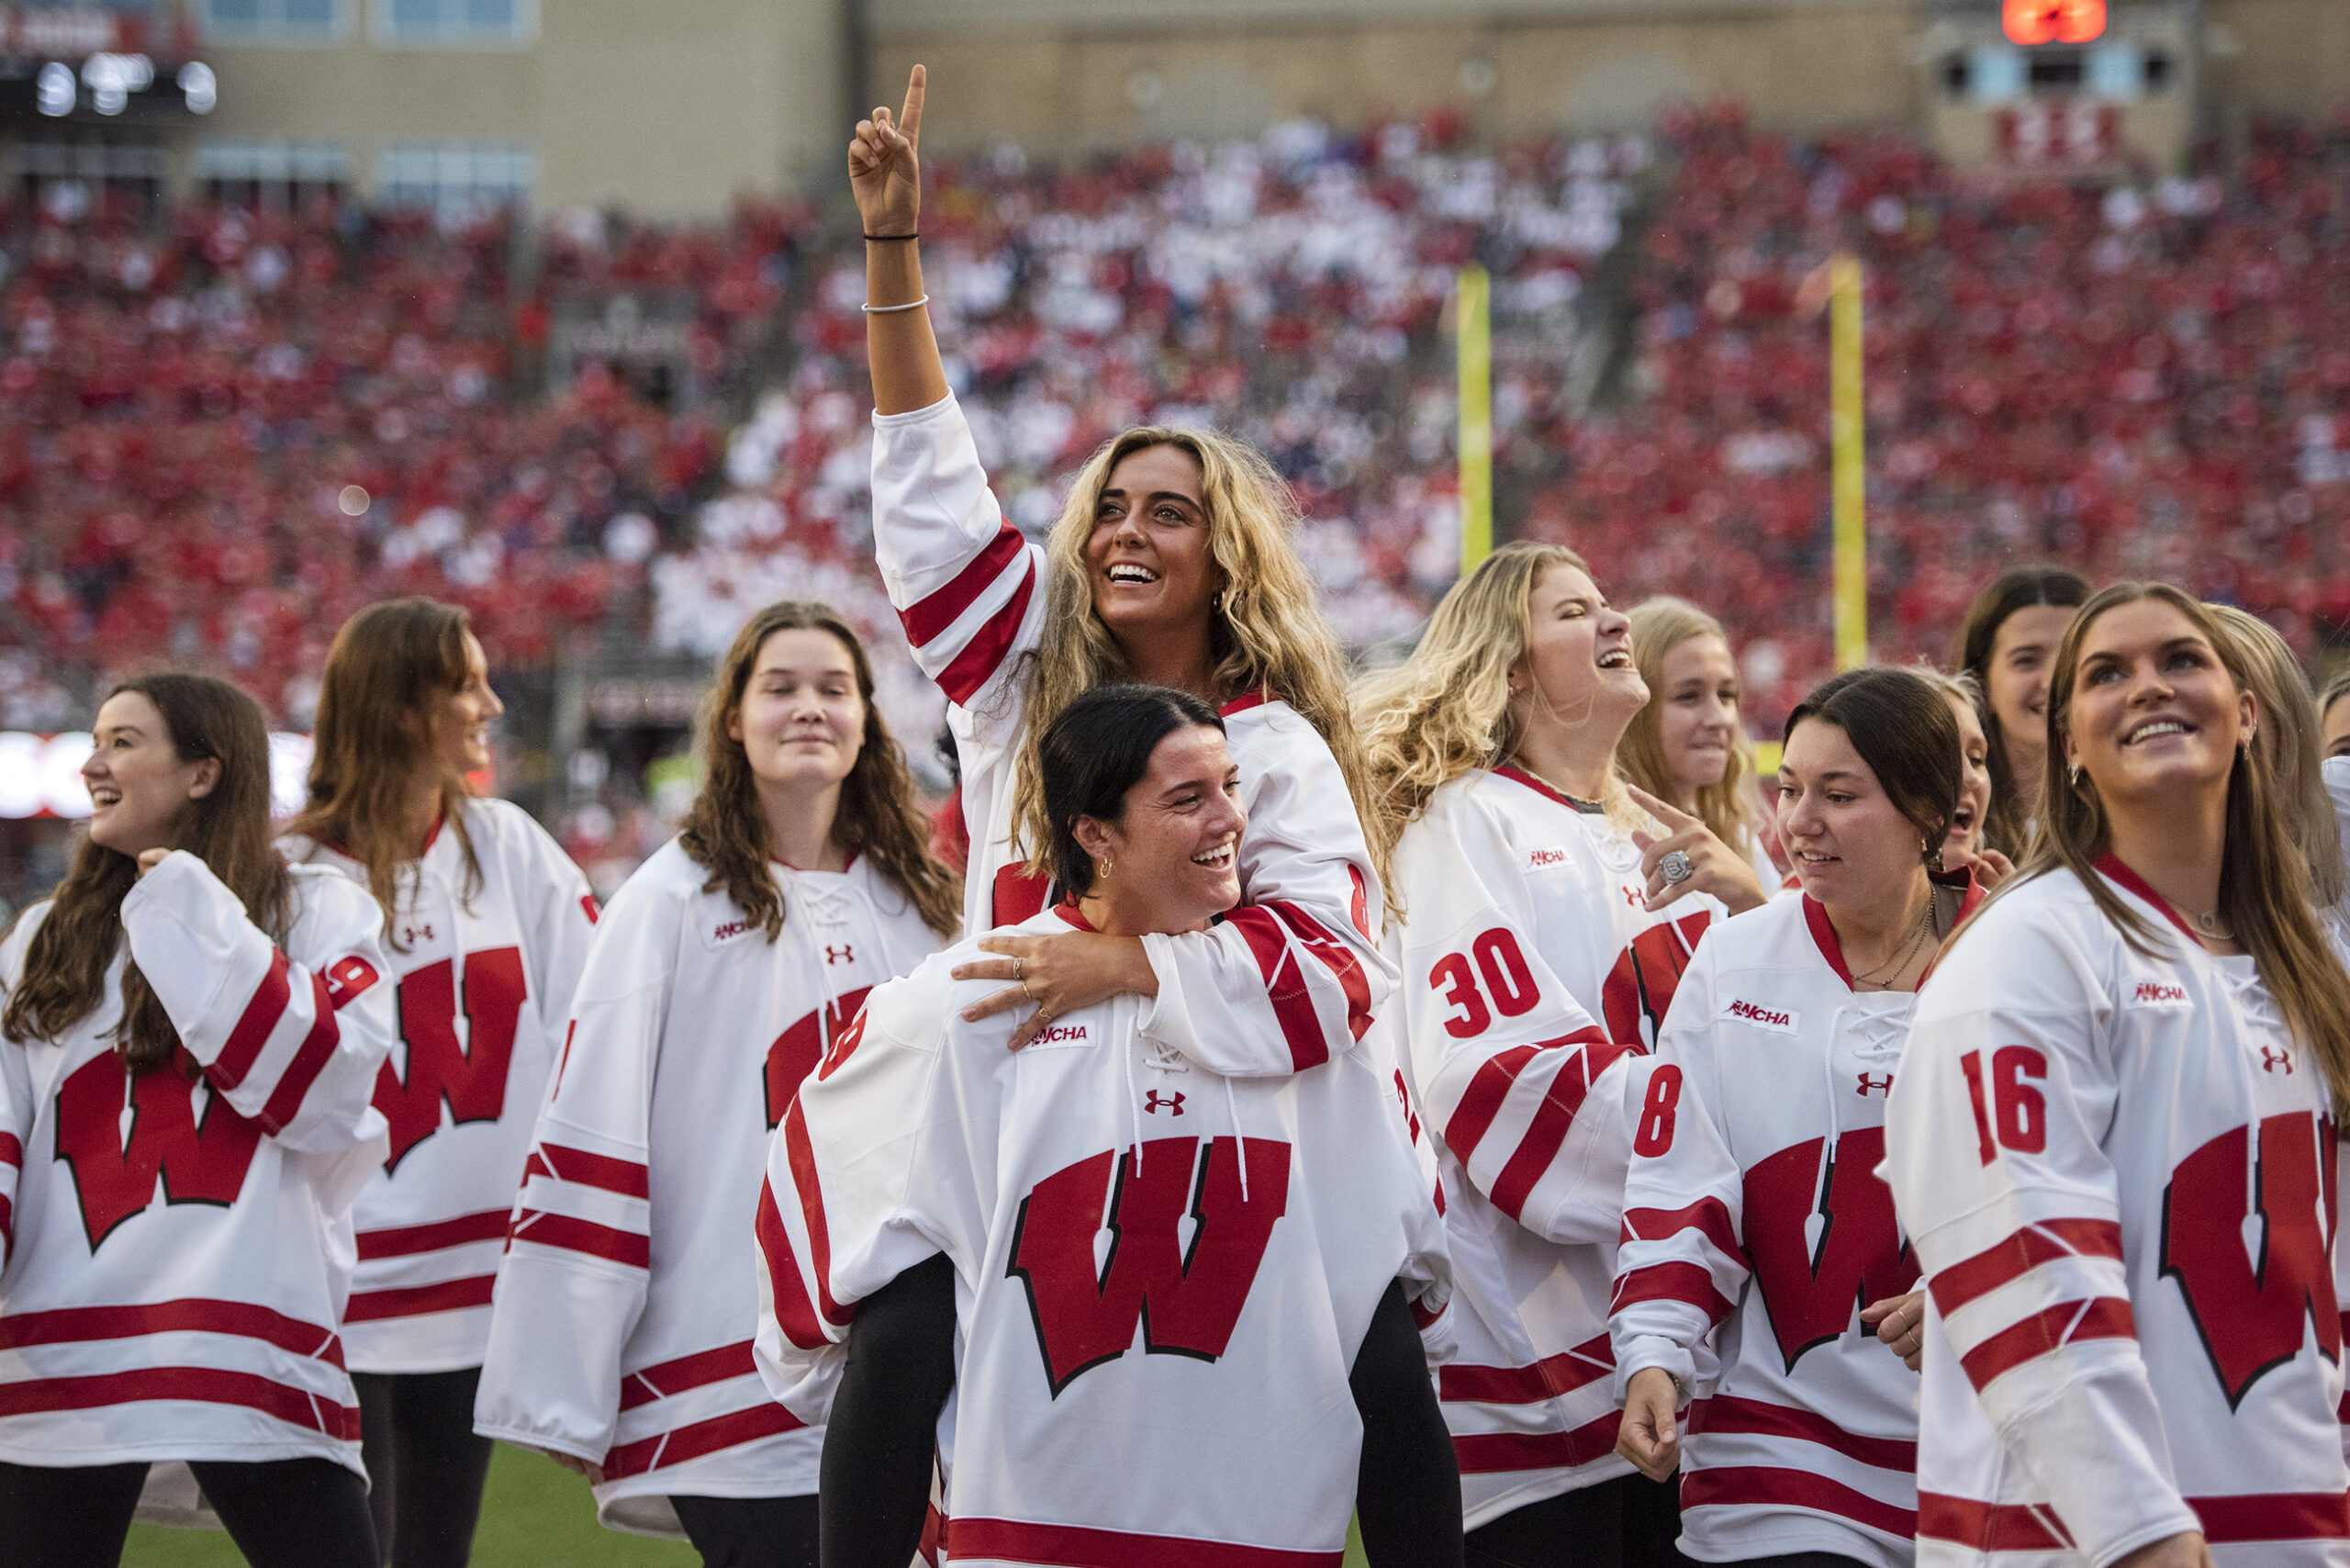 The Wisconsin women’s hockey team steps onto the field at Camp Randall as fans cheer.